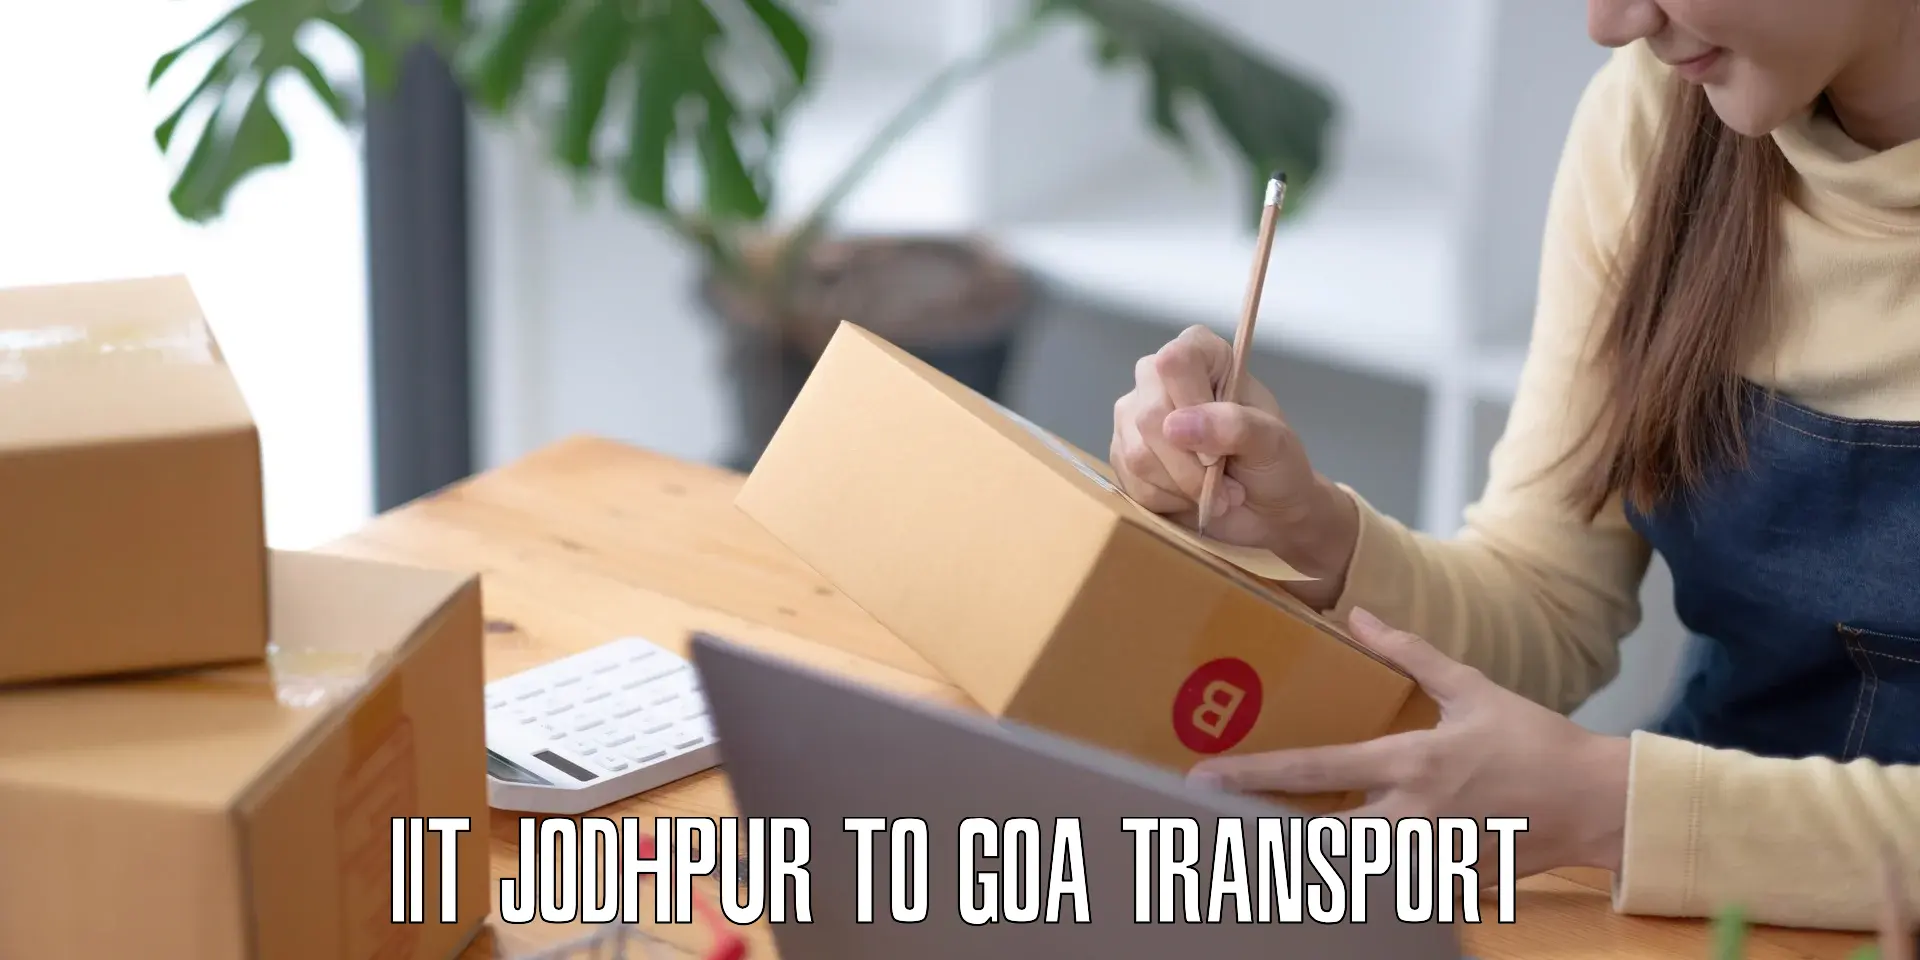 Transport shared services in IIT Jodhpur to NIT Goa